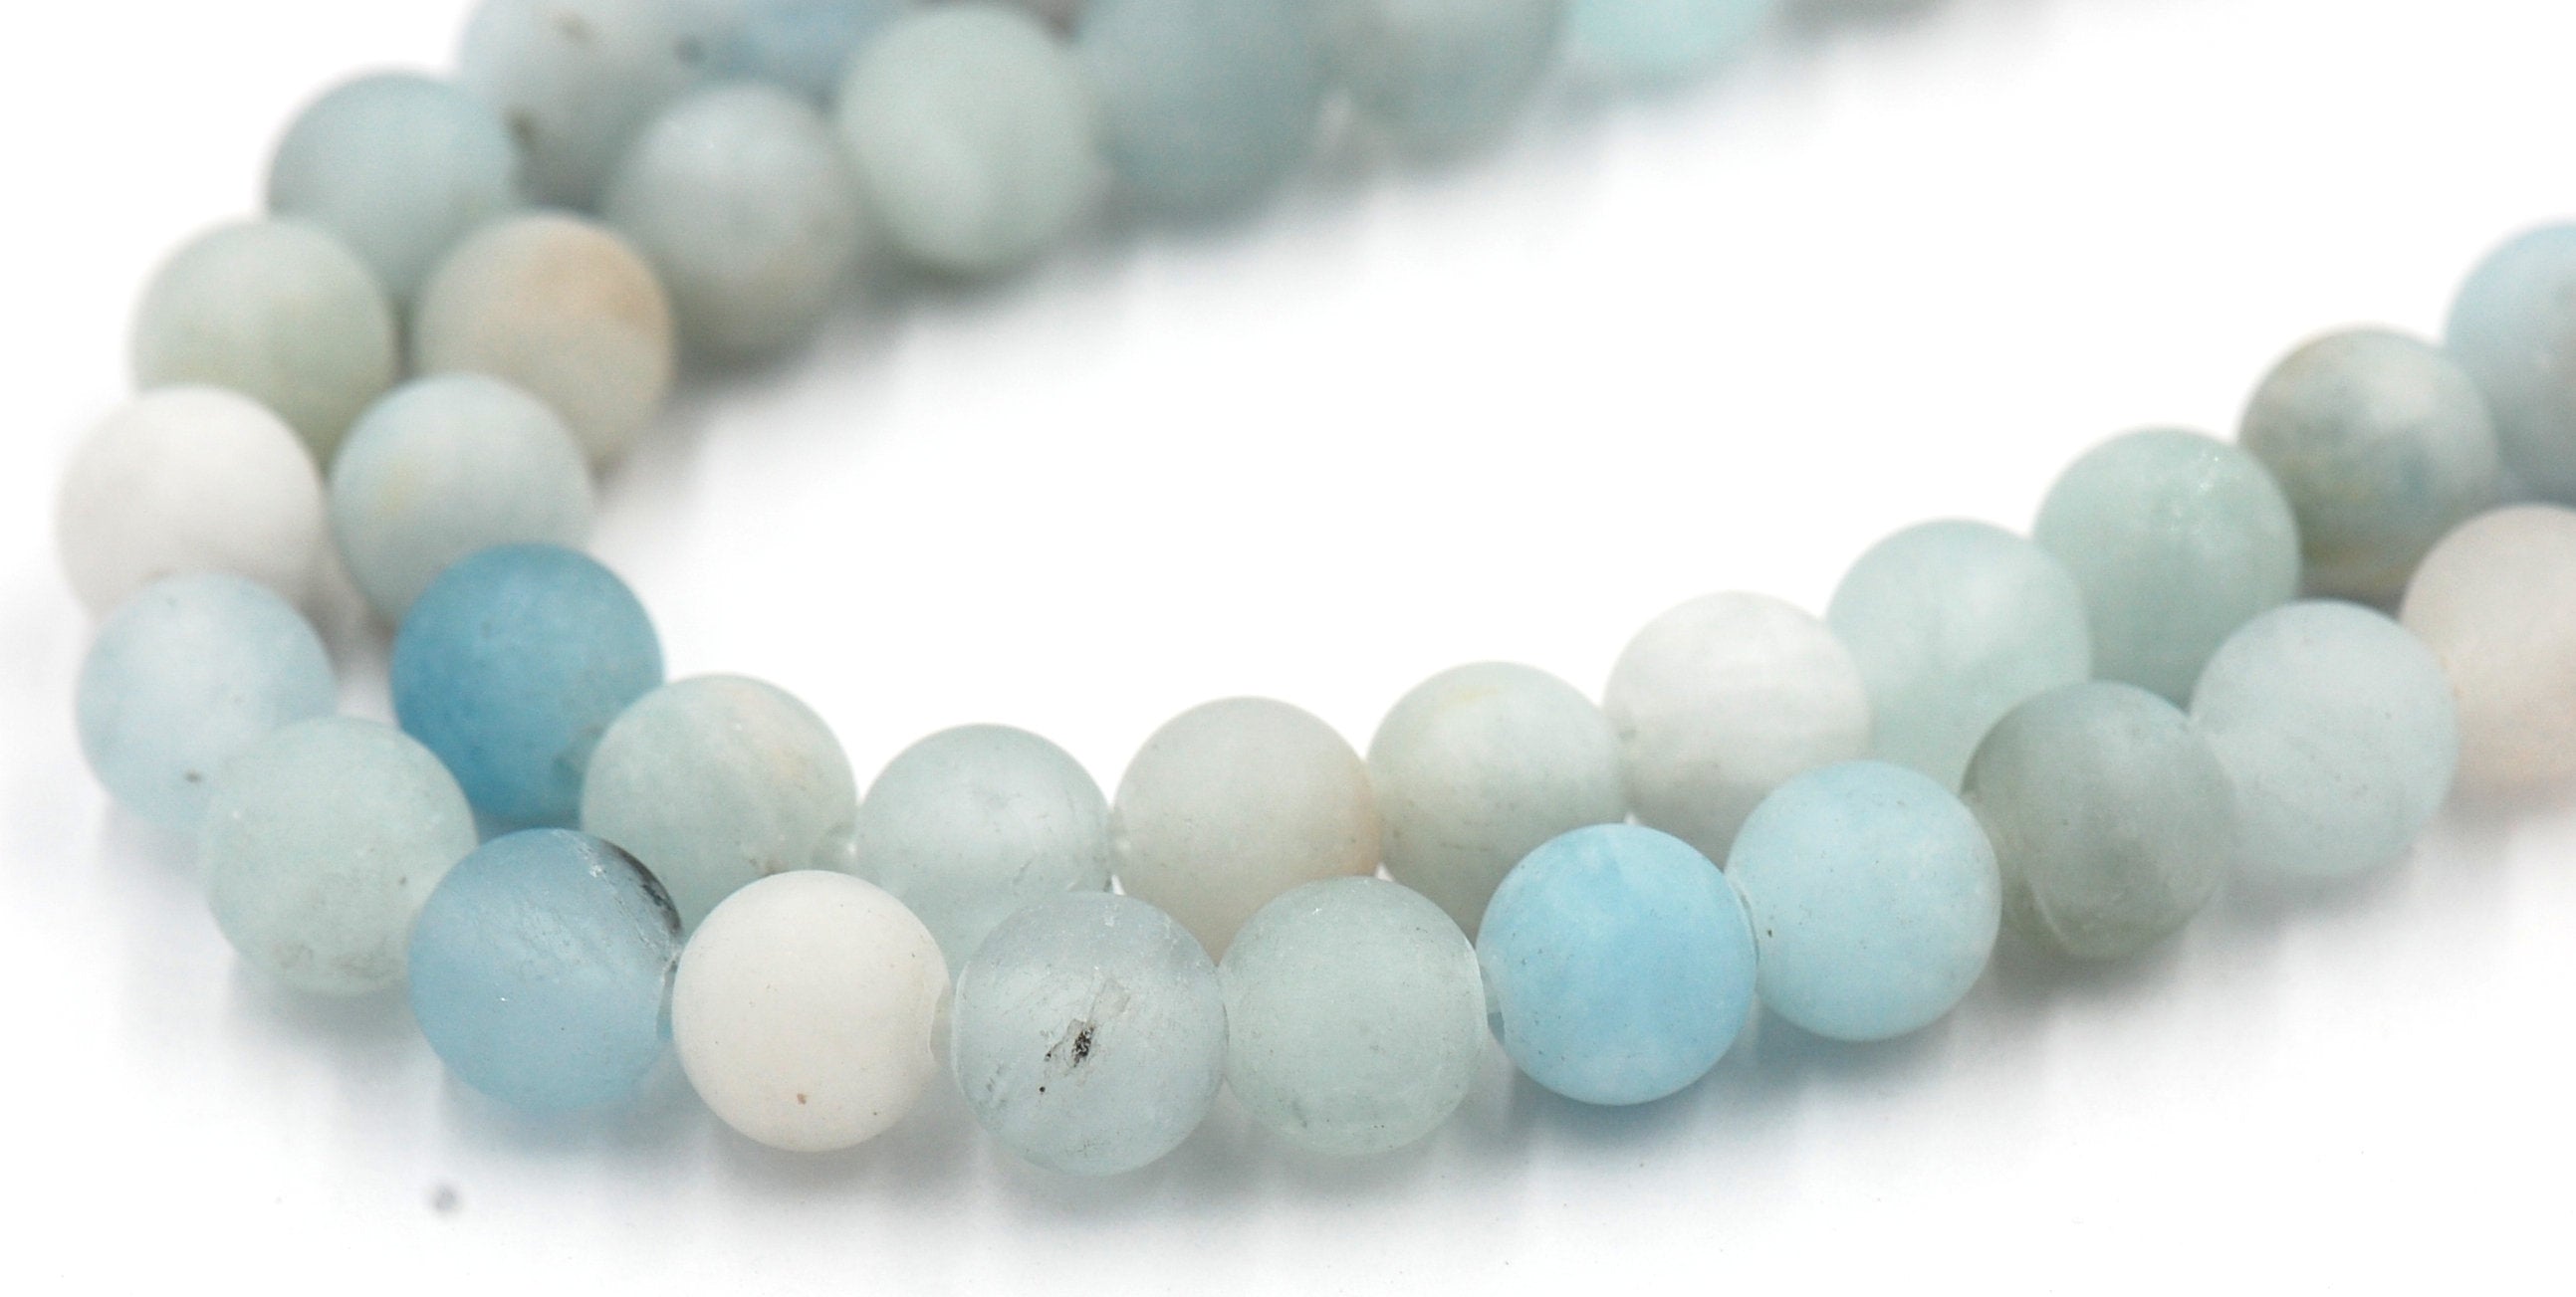 Large Hole Matte Multicolor Aquamarine Blue Green 6mm, 8mm, 10mm, 12mm Round Beads -Full Strand